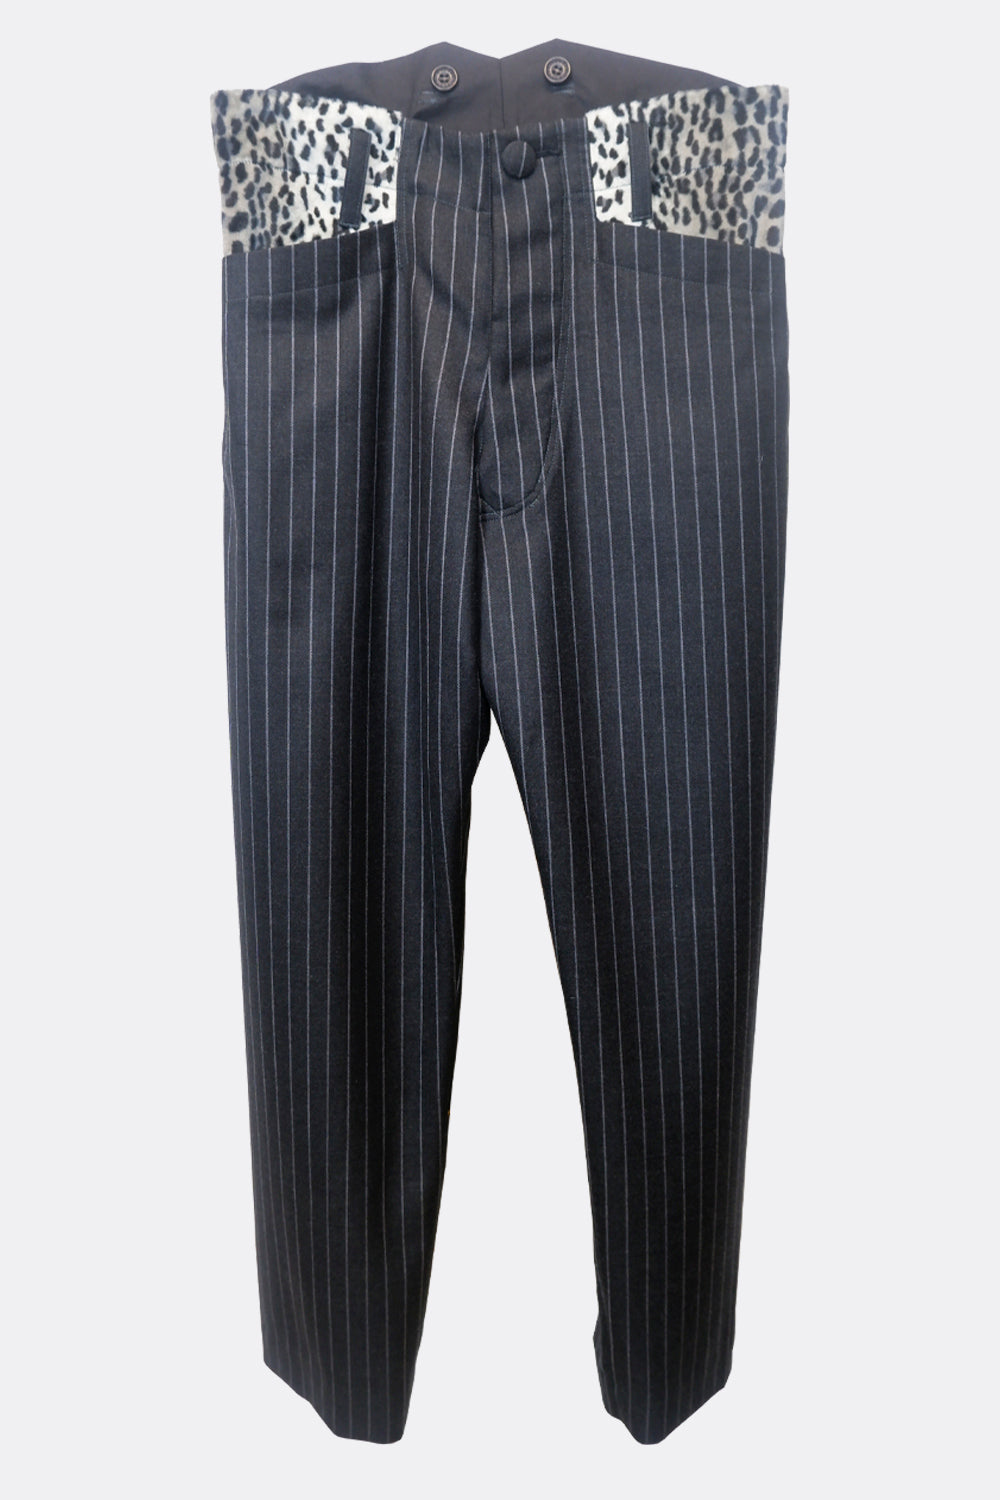 CAVALRY TROUSERS IN GREY STRIPE WITH LEOPARD CONTRAST (made to order)-menswear-A Child Of The Jago